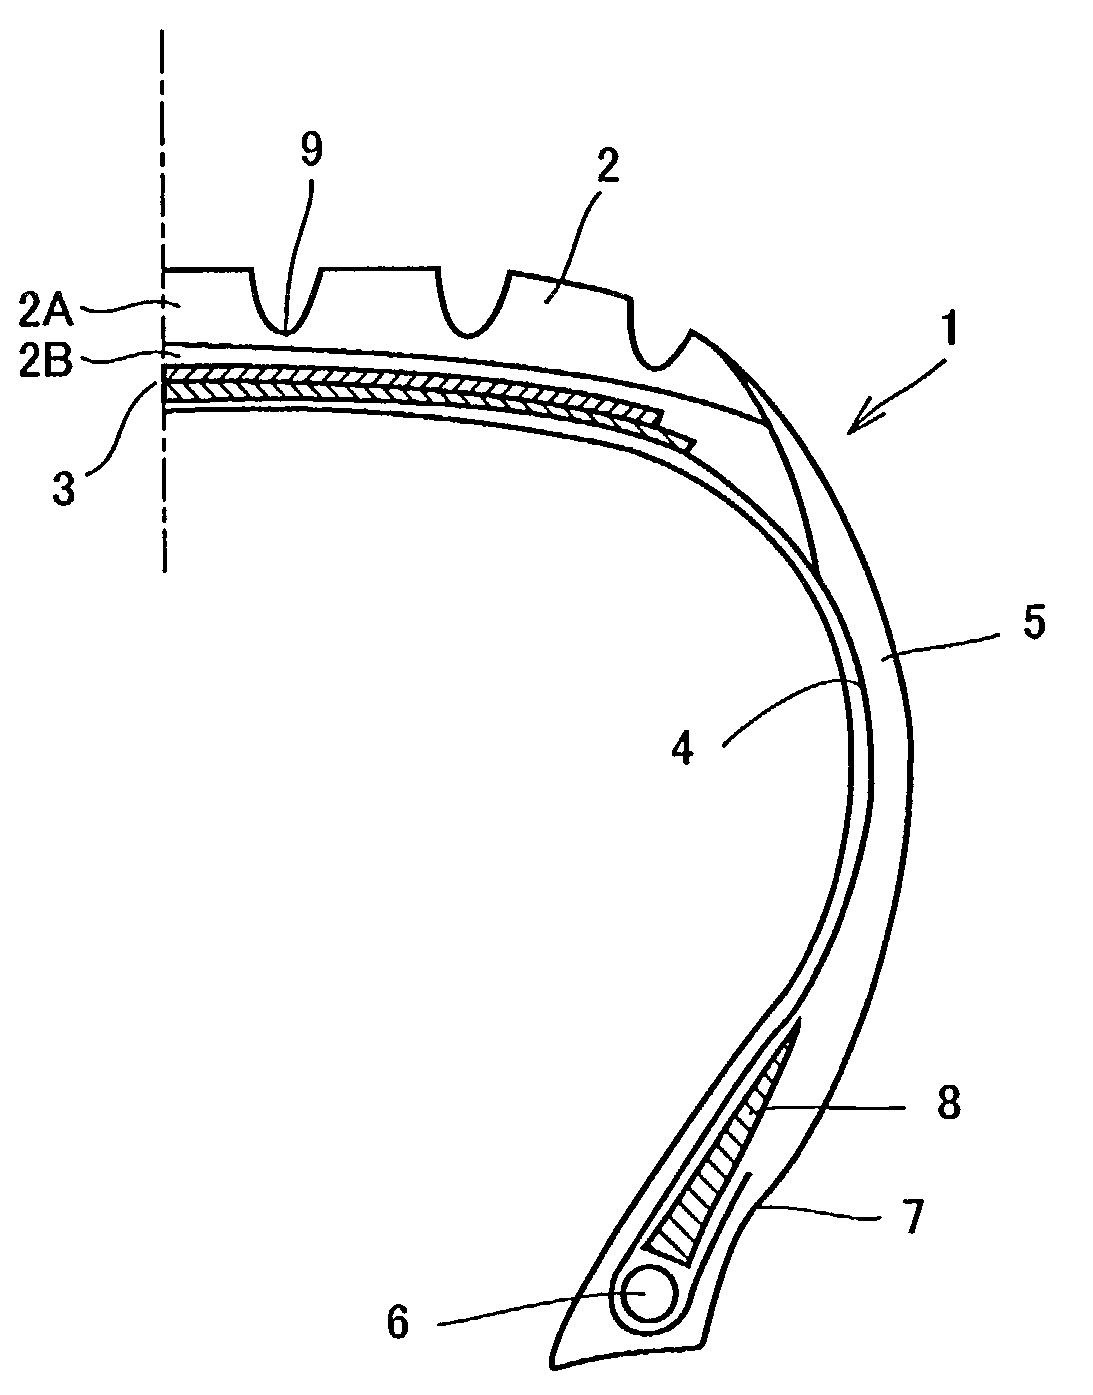 Pneumatic tire having tread portion formed of two layers